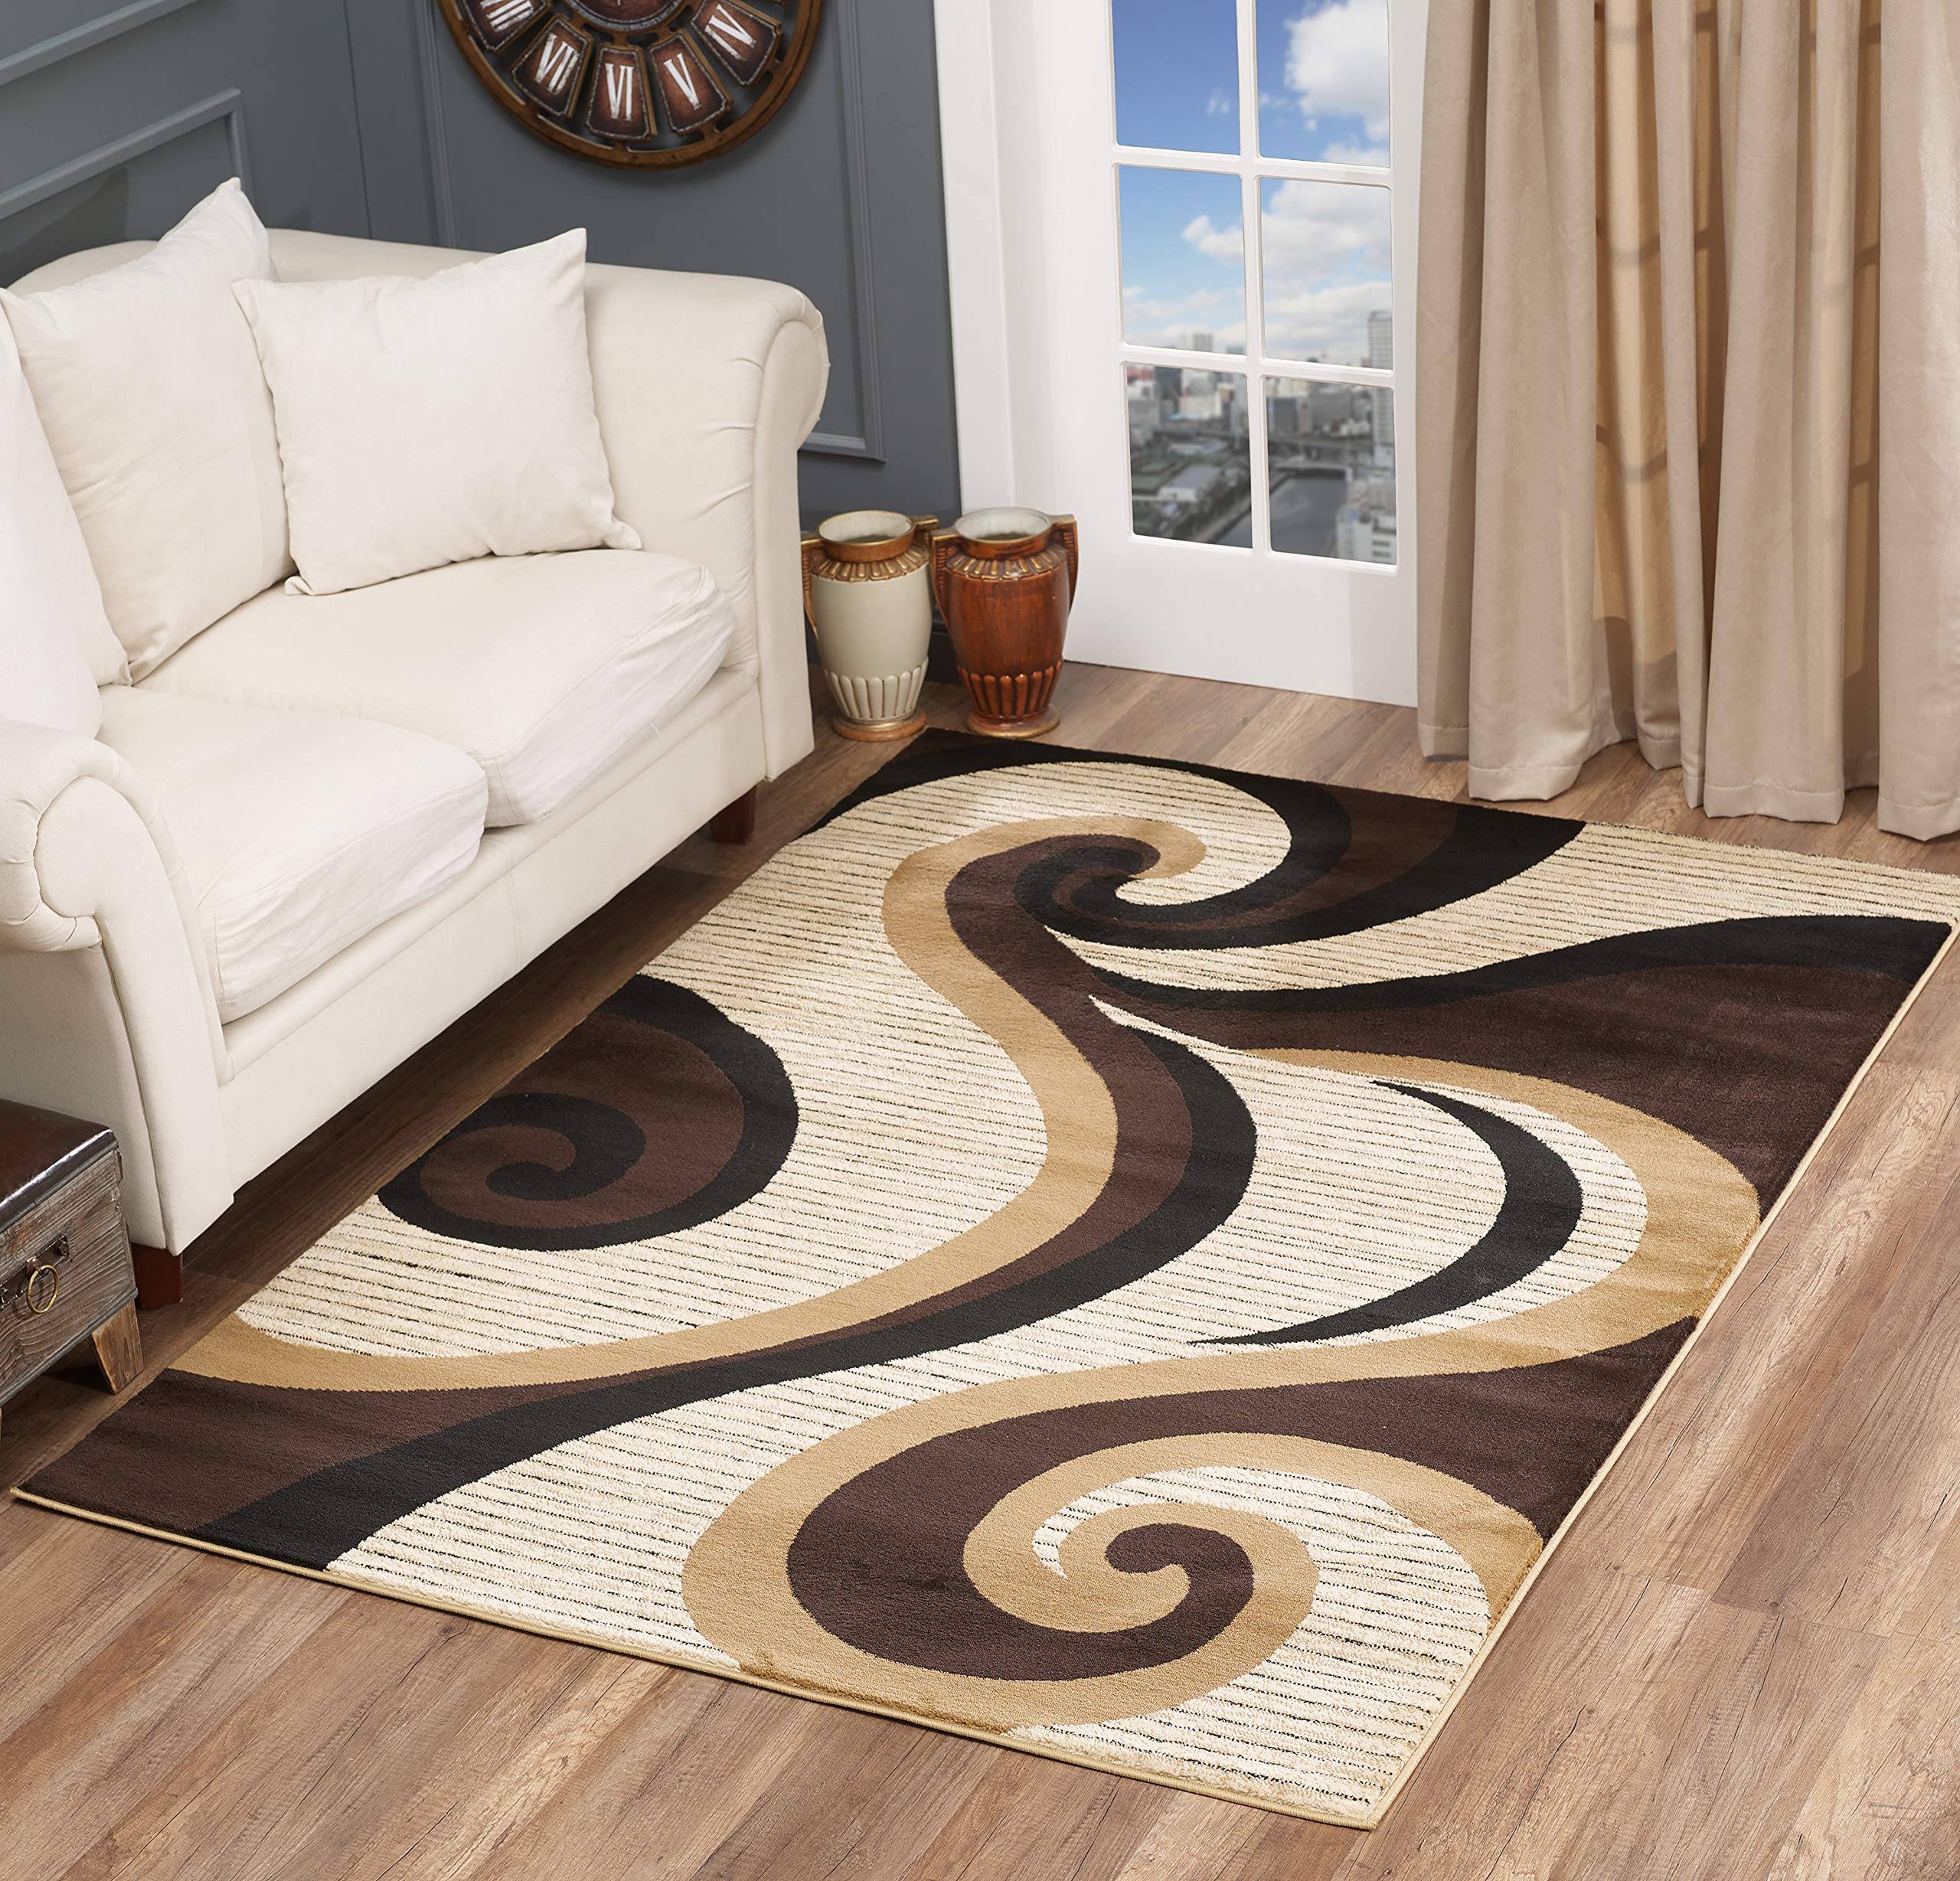 Glory Rugs Modern Area Rug 4x6 Swirls Carpet Bedroom Living Room Contemporary Dining Accent Sevilla Collection 4817A (Brown)